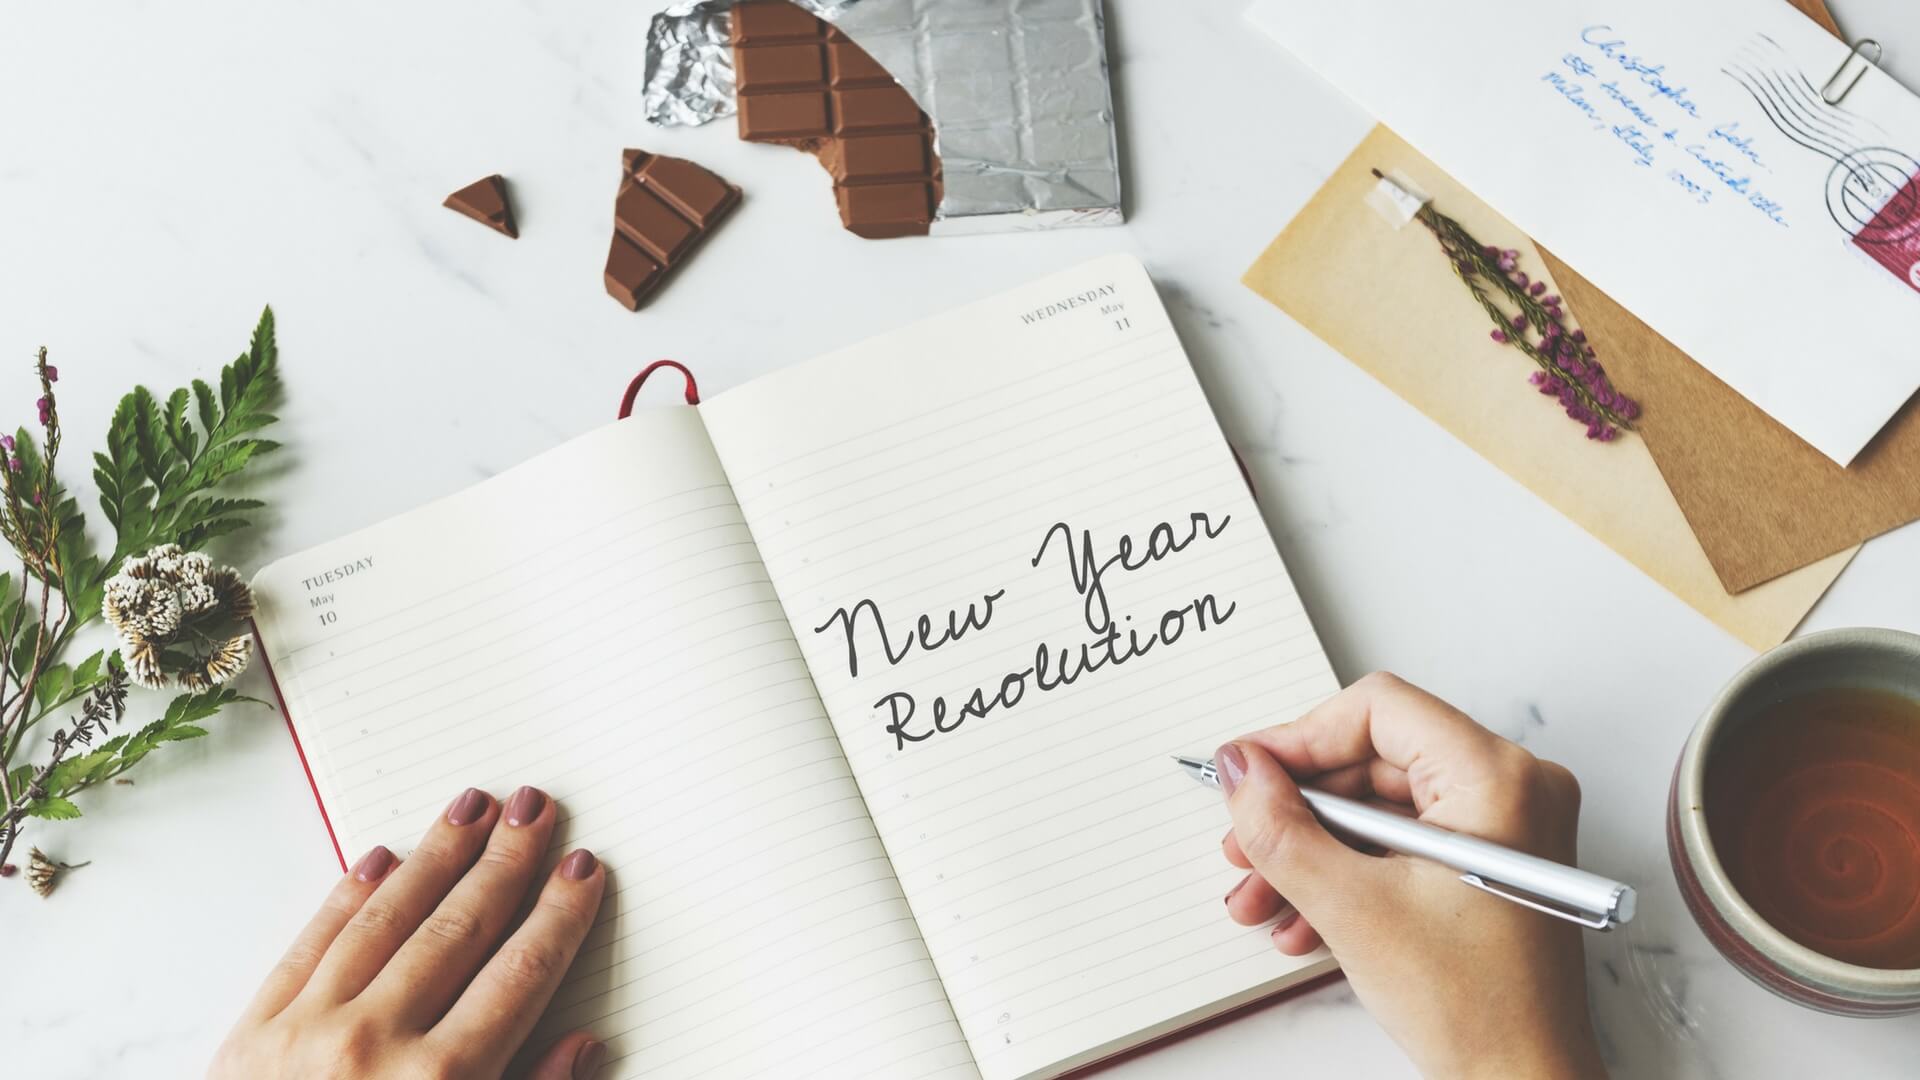 The Most Important New Year’s Resolutions